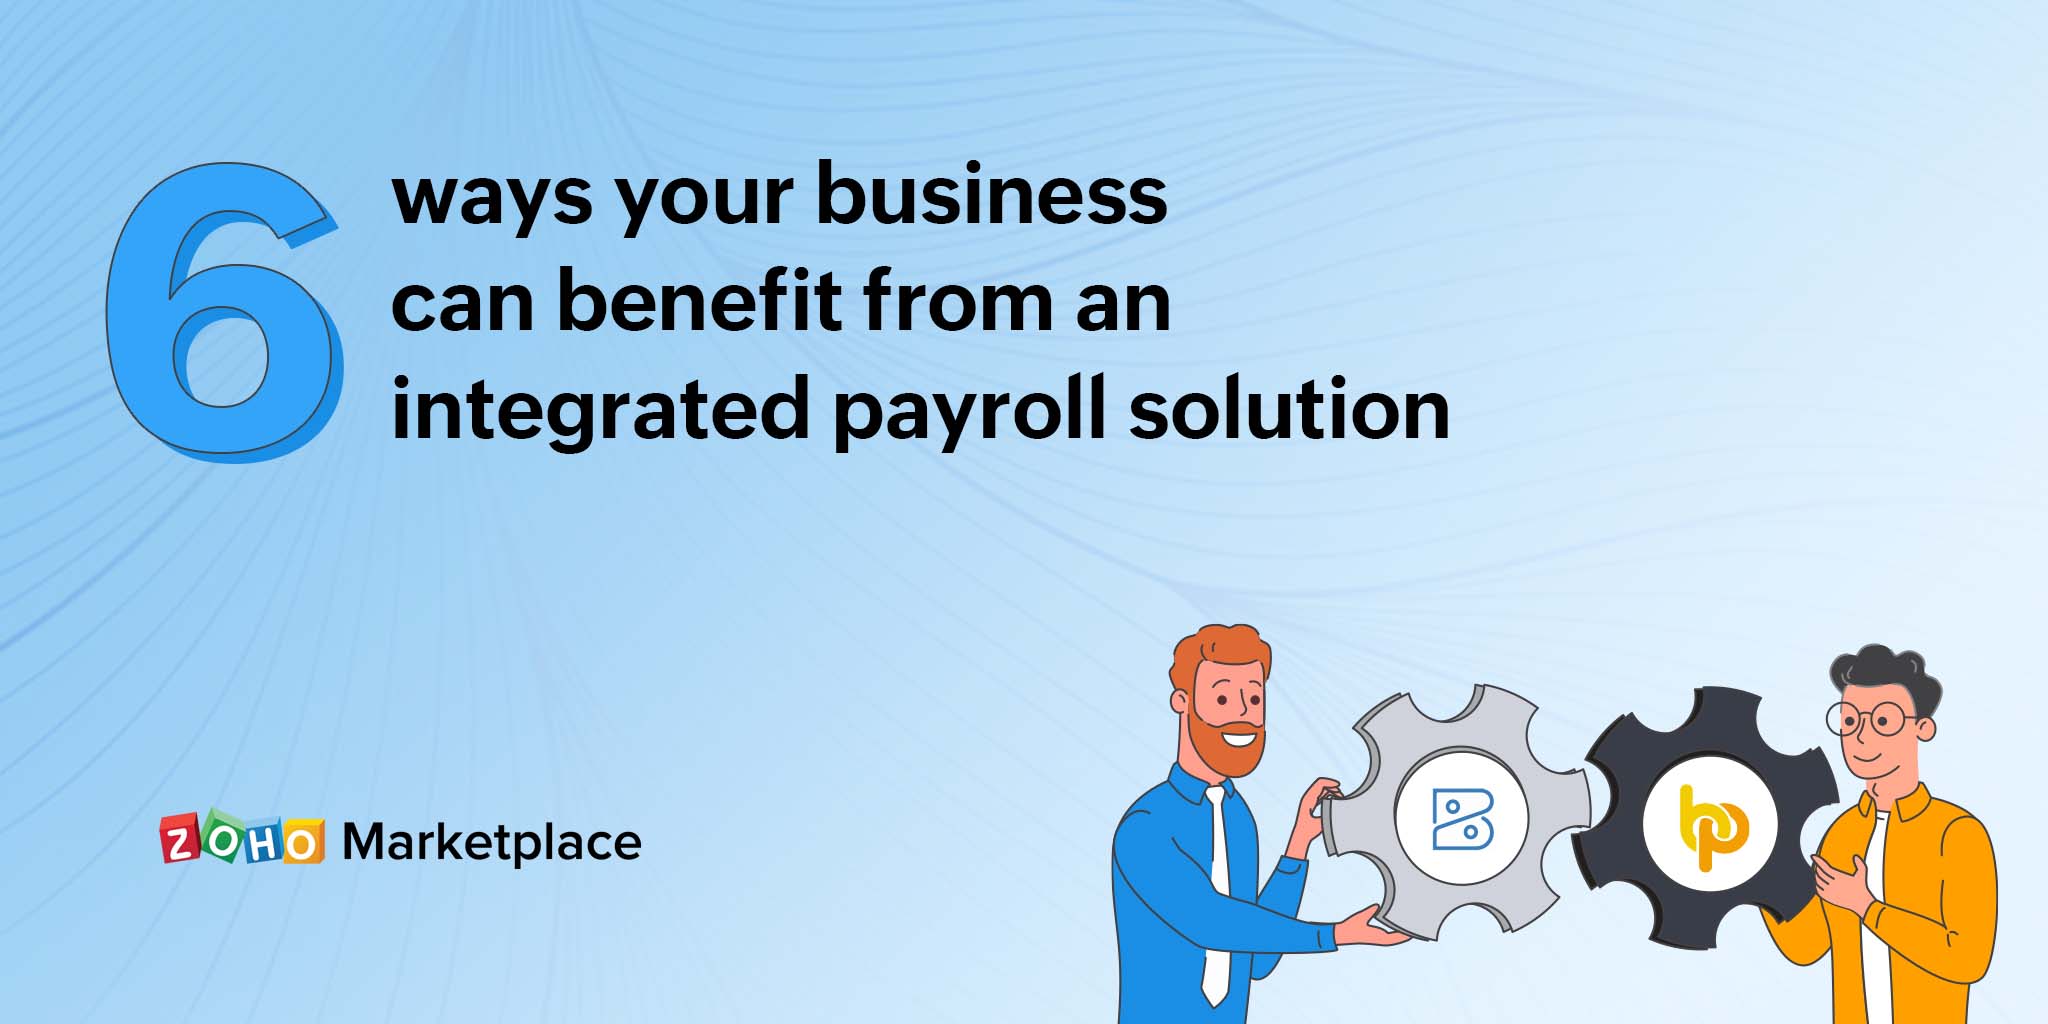 6 ways your business can benefit from an integrated payroll solution